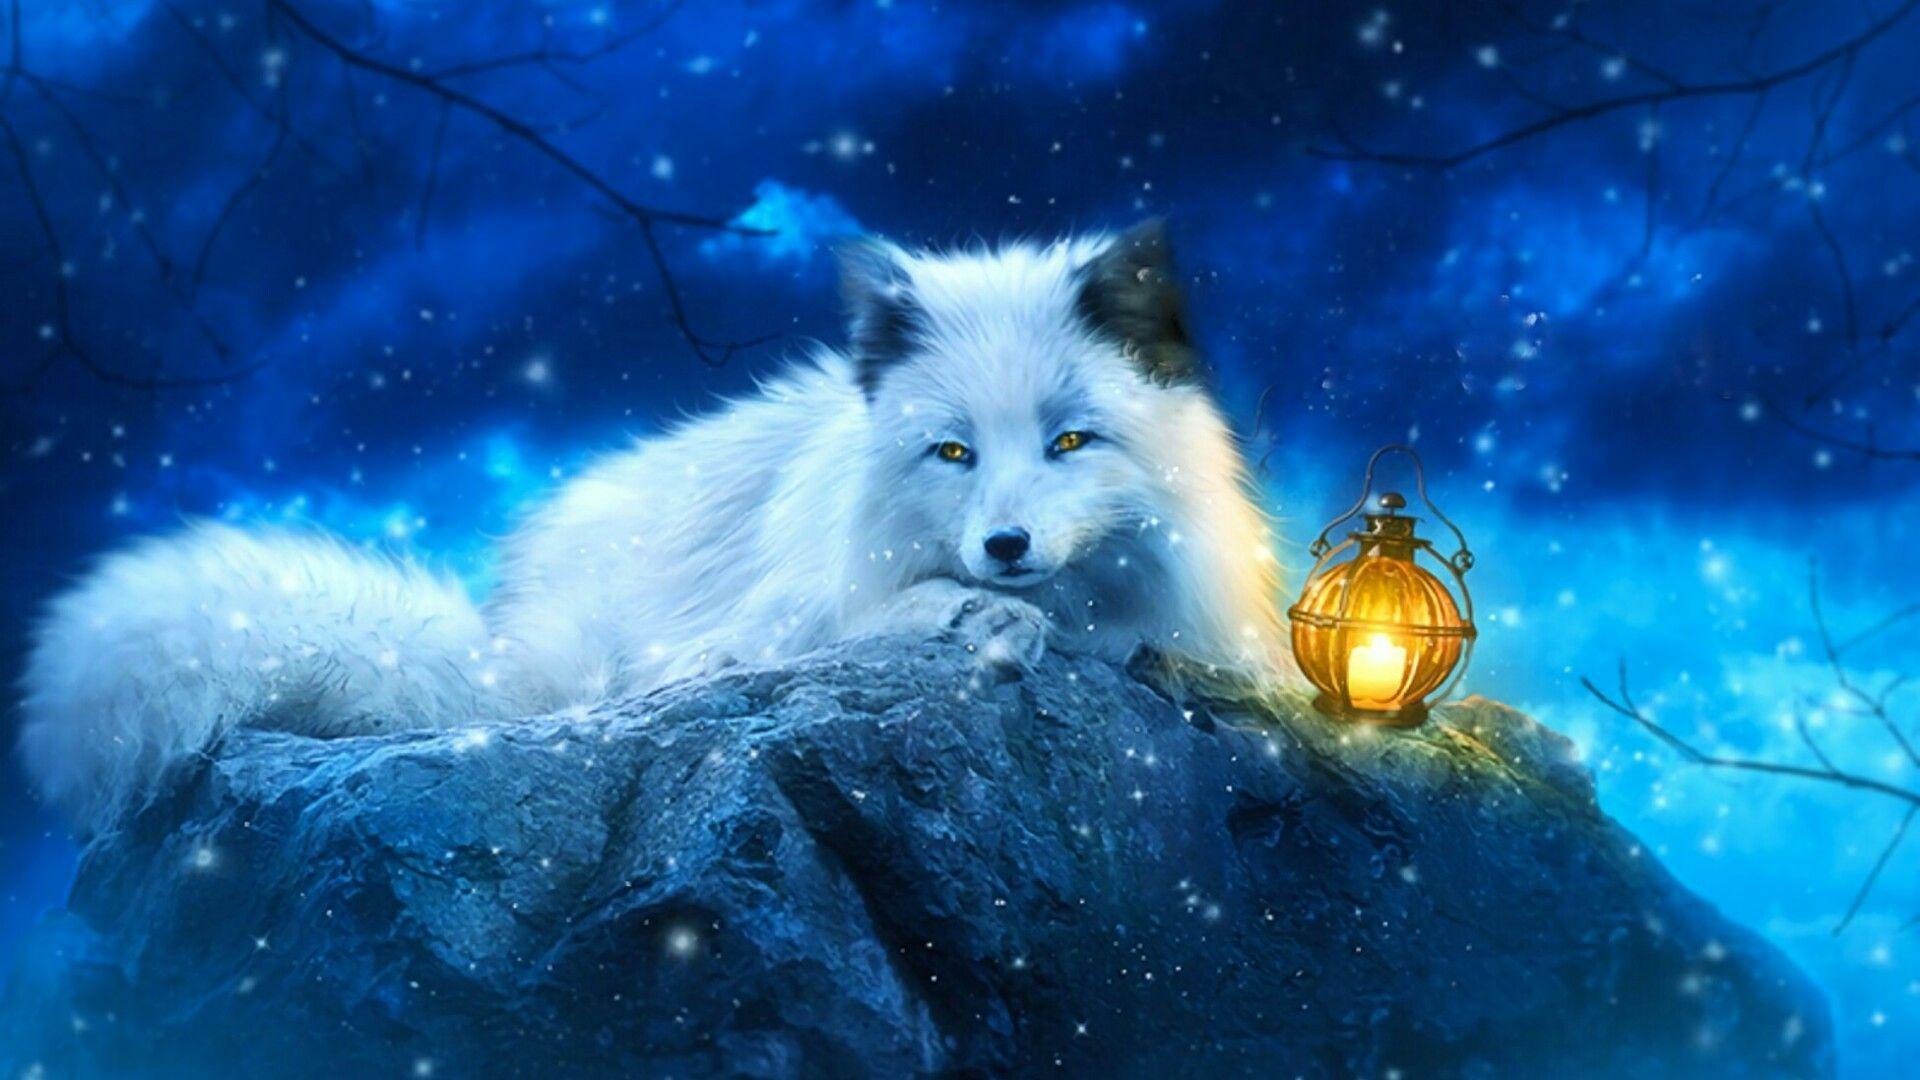 800x1280 Animal Fox Okami Nexus 7Samsung Galaxy Tab 10Note Android  Tablets HD 4k Wallpapers Images Backgrounds Photos and Pictures